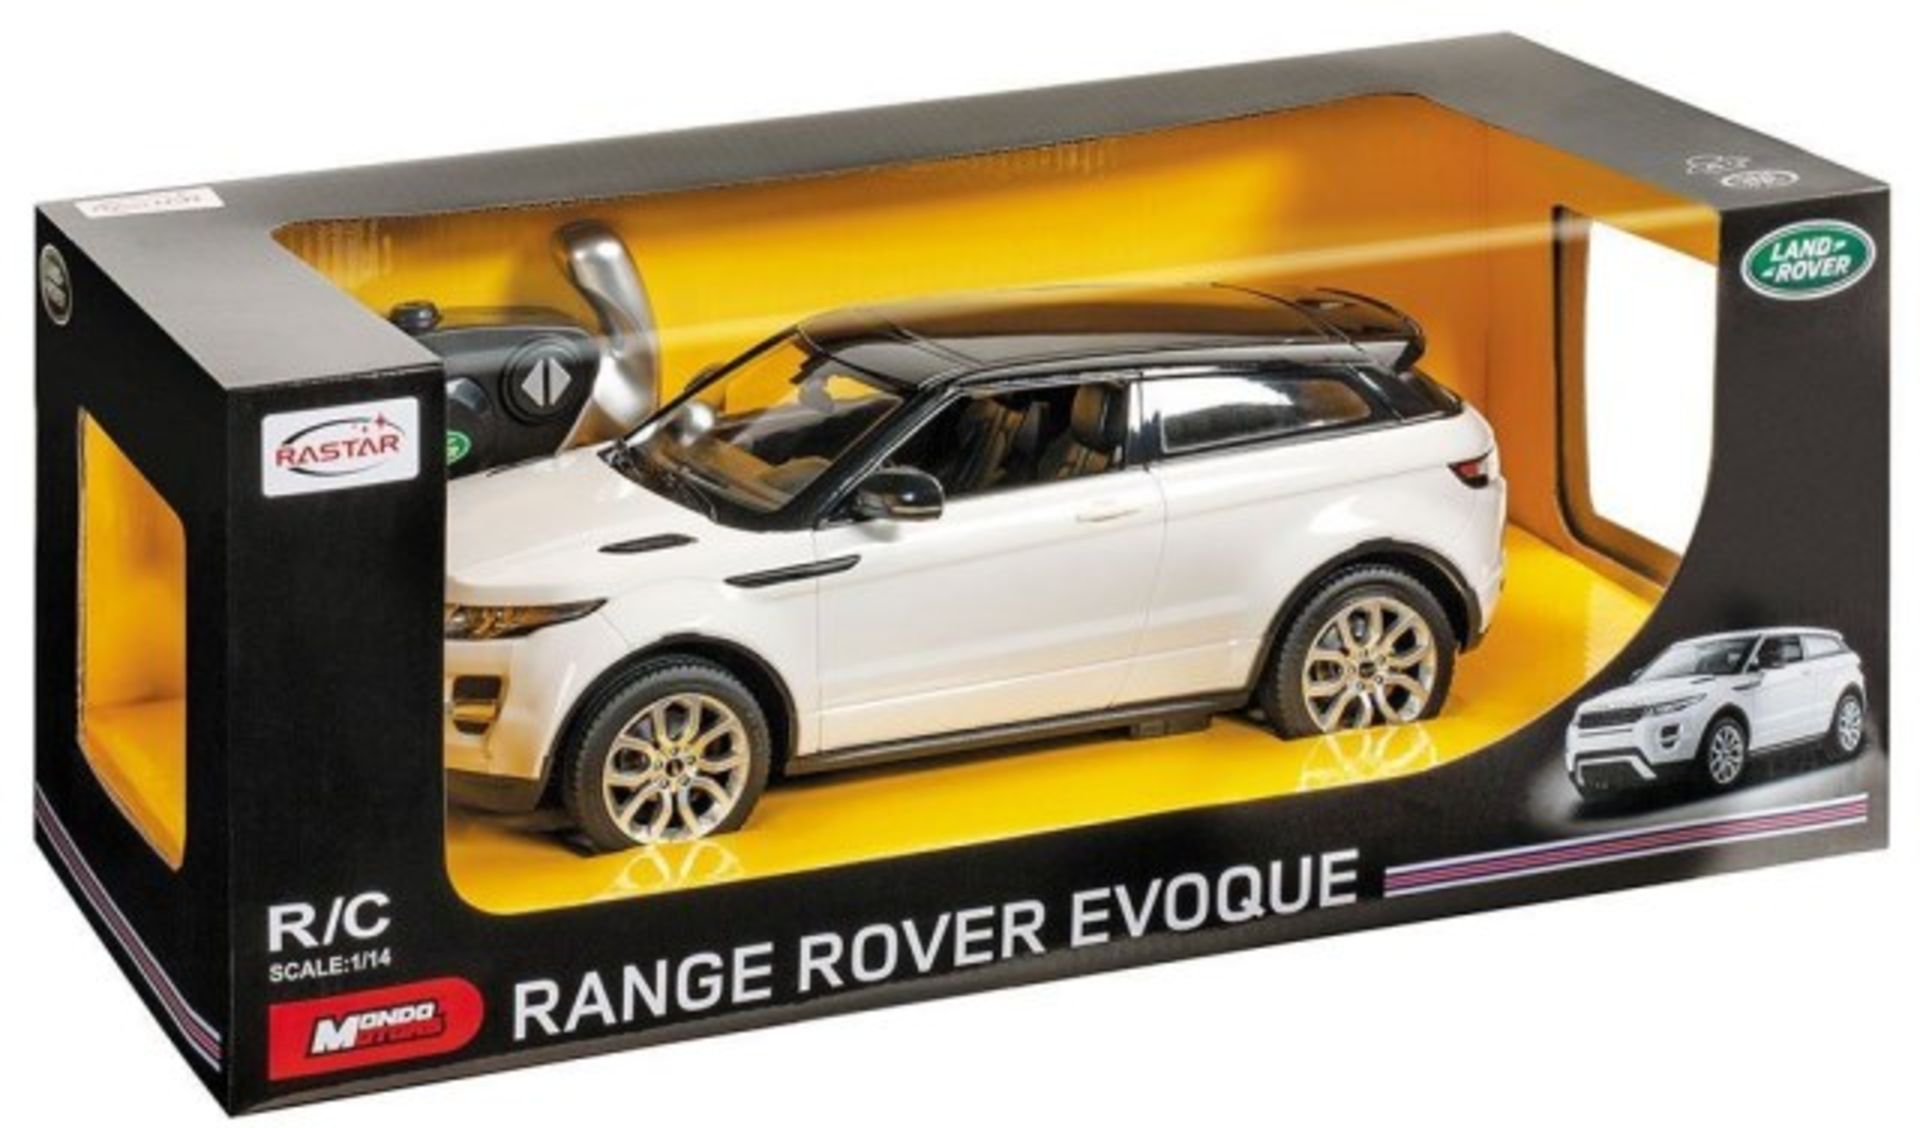 V Brand New 1:14 Scale R/C Range Rover Evoque SRP49.99 Various Colours X 2 YOUR BID PRICE TO BE